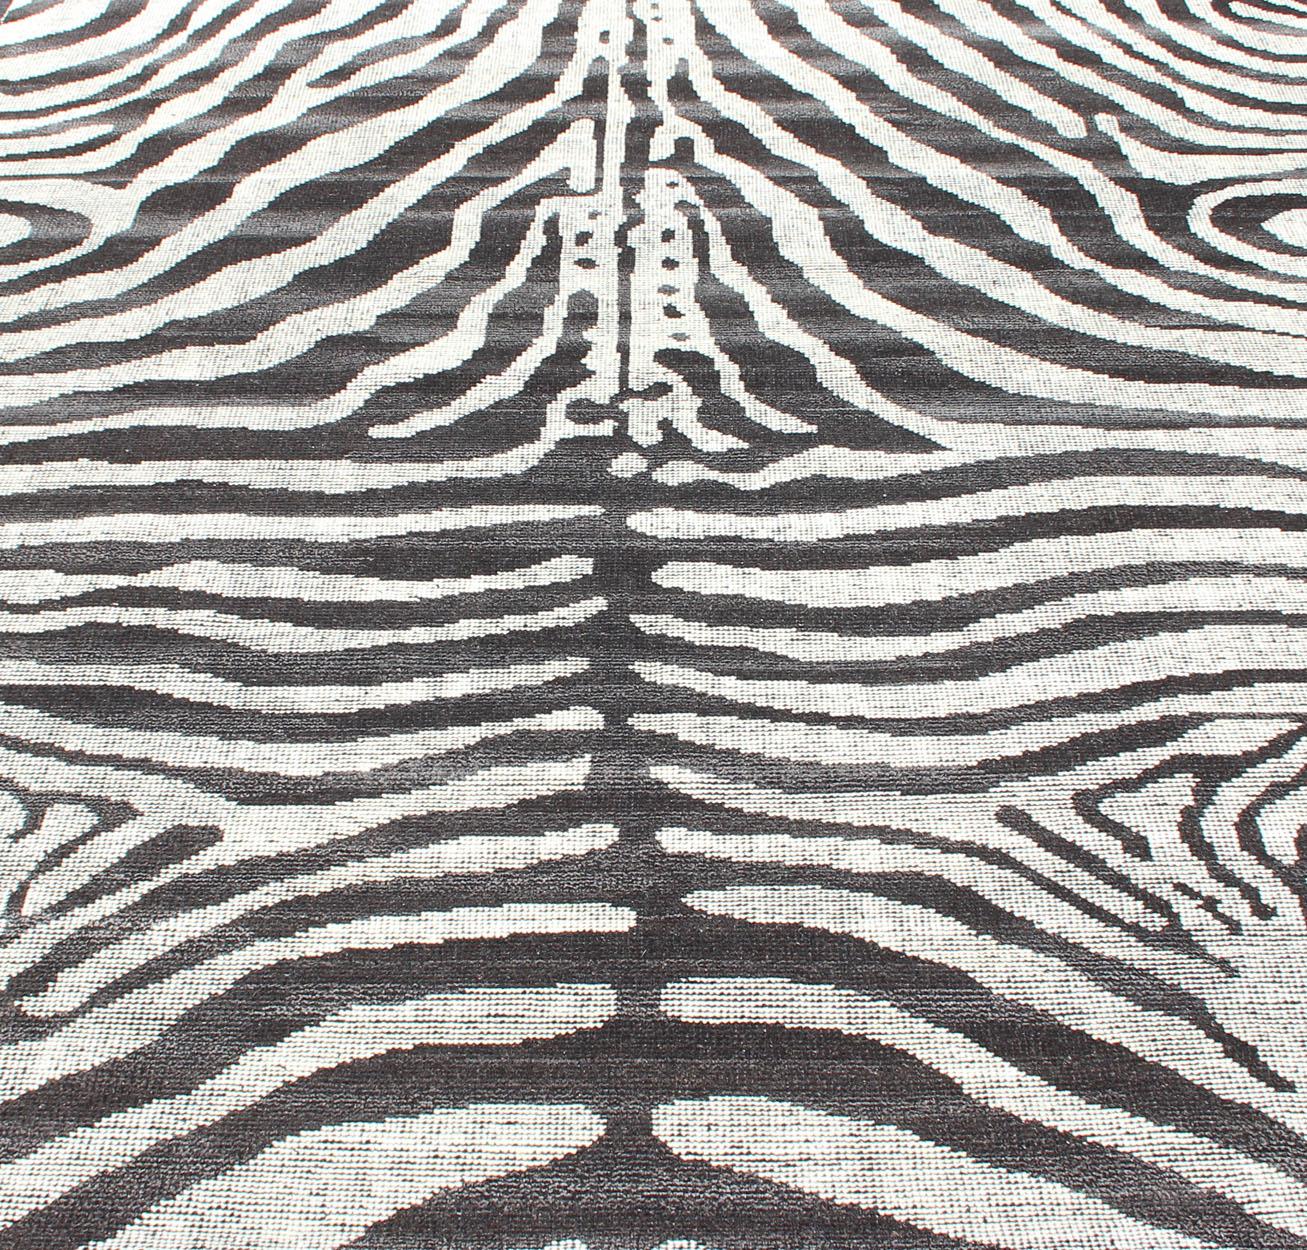 Ivory black and charcoal modern zebra design distressed piled rug, rug KHN-1023-TR-1048, country of origin / type: India / Modern piled rug.

A unique take on a zebra design, this dynamic and exciting composition is beautifully suited for both